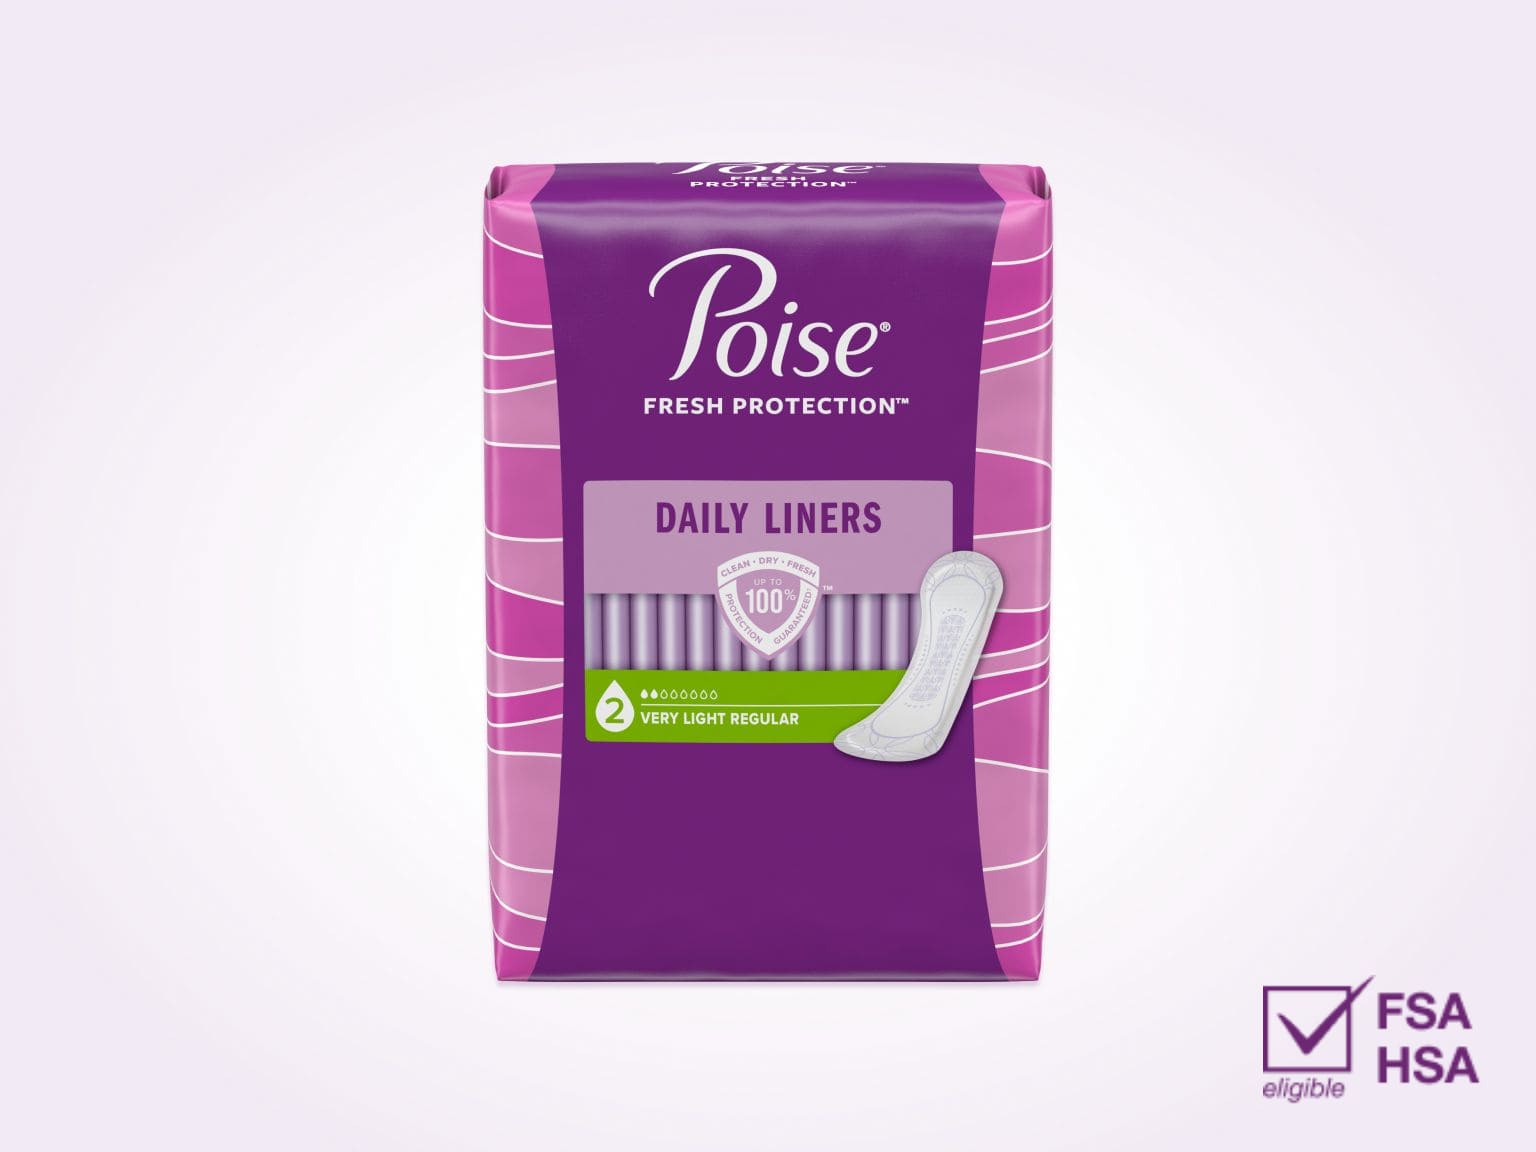 Poise® Daily Liners For Bladder Leaks, 2 Drop Very Light Absorbency, Regular Length